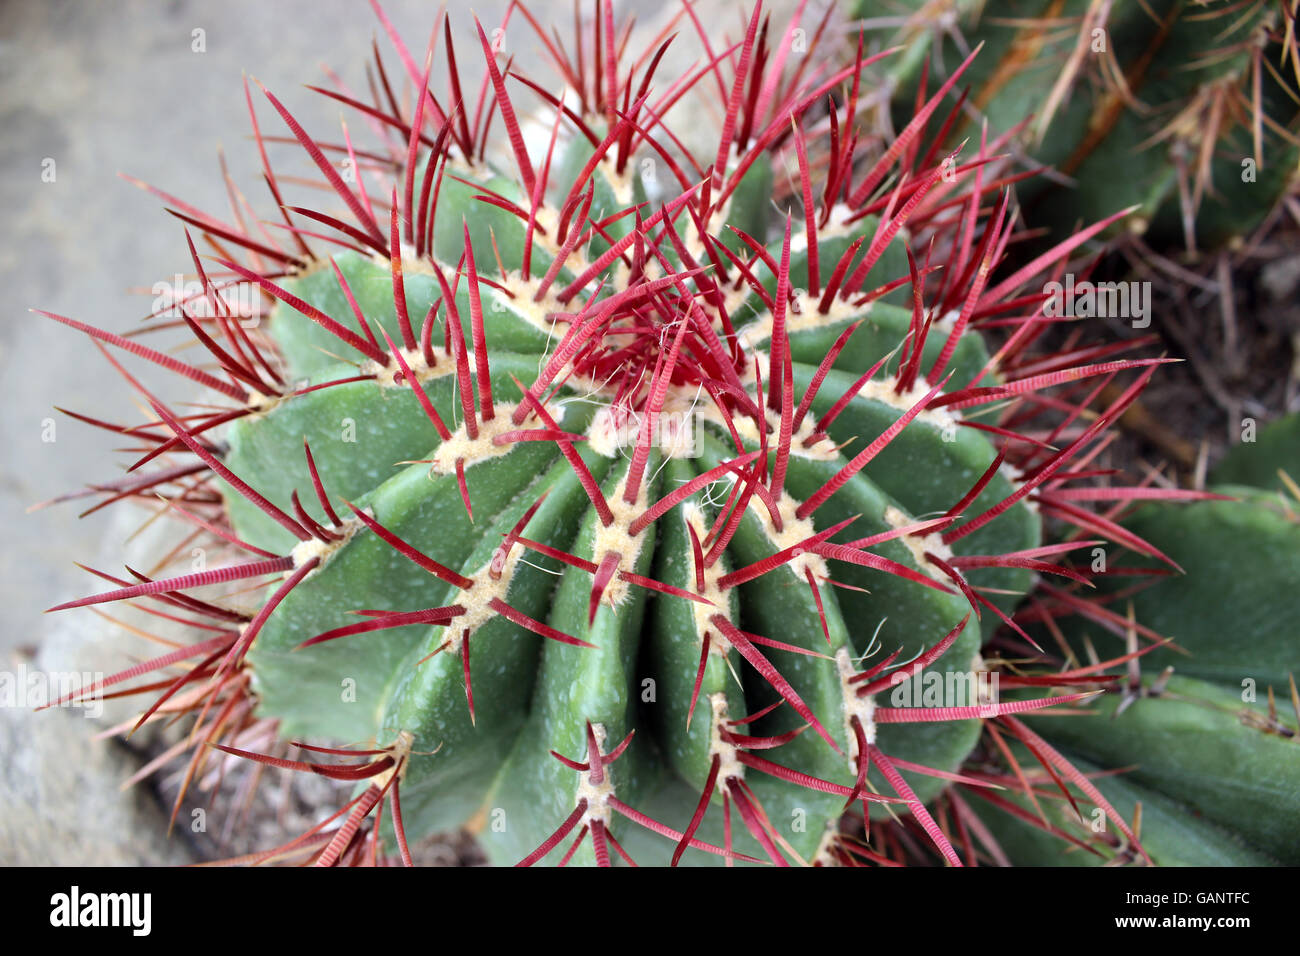 Cactus. Green cactus thorns in the cultivation bowl ,it has lots of small  long red stings Stock Photo - Alamy